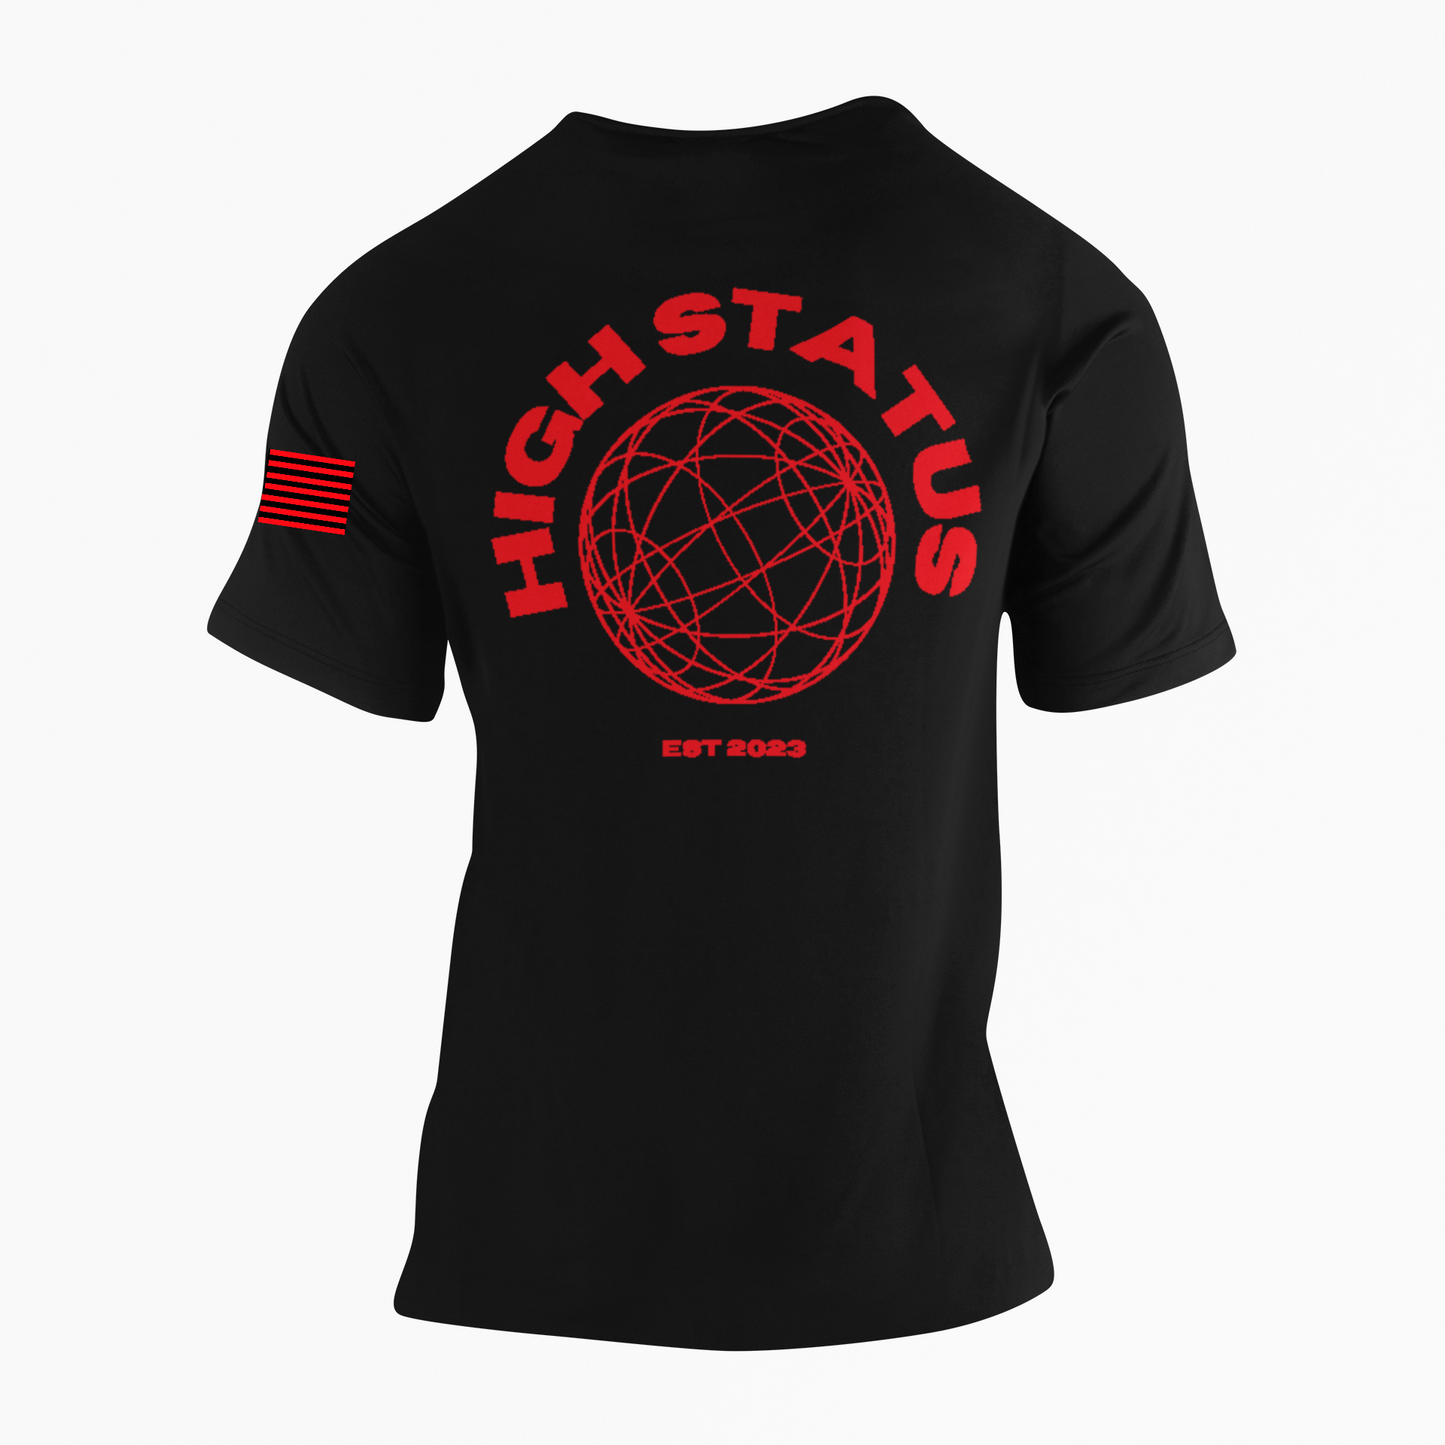 HIGH STATUS CLASSIC RED ON BLACK TEE